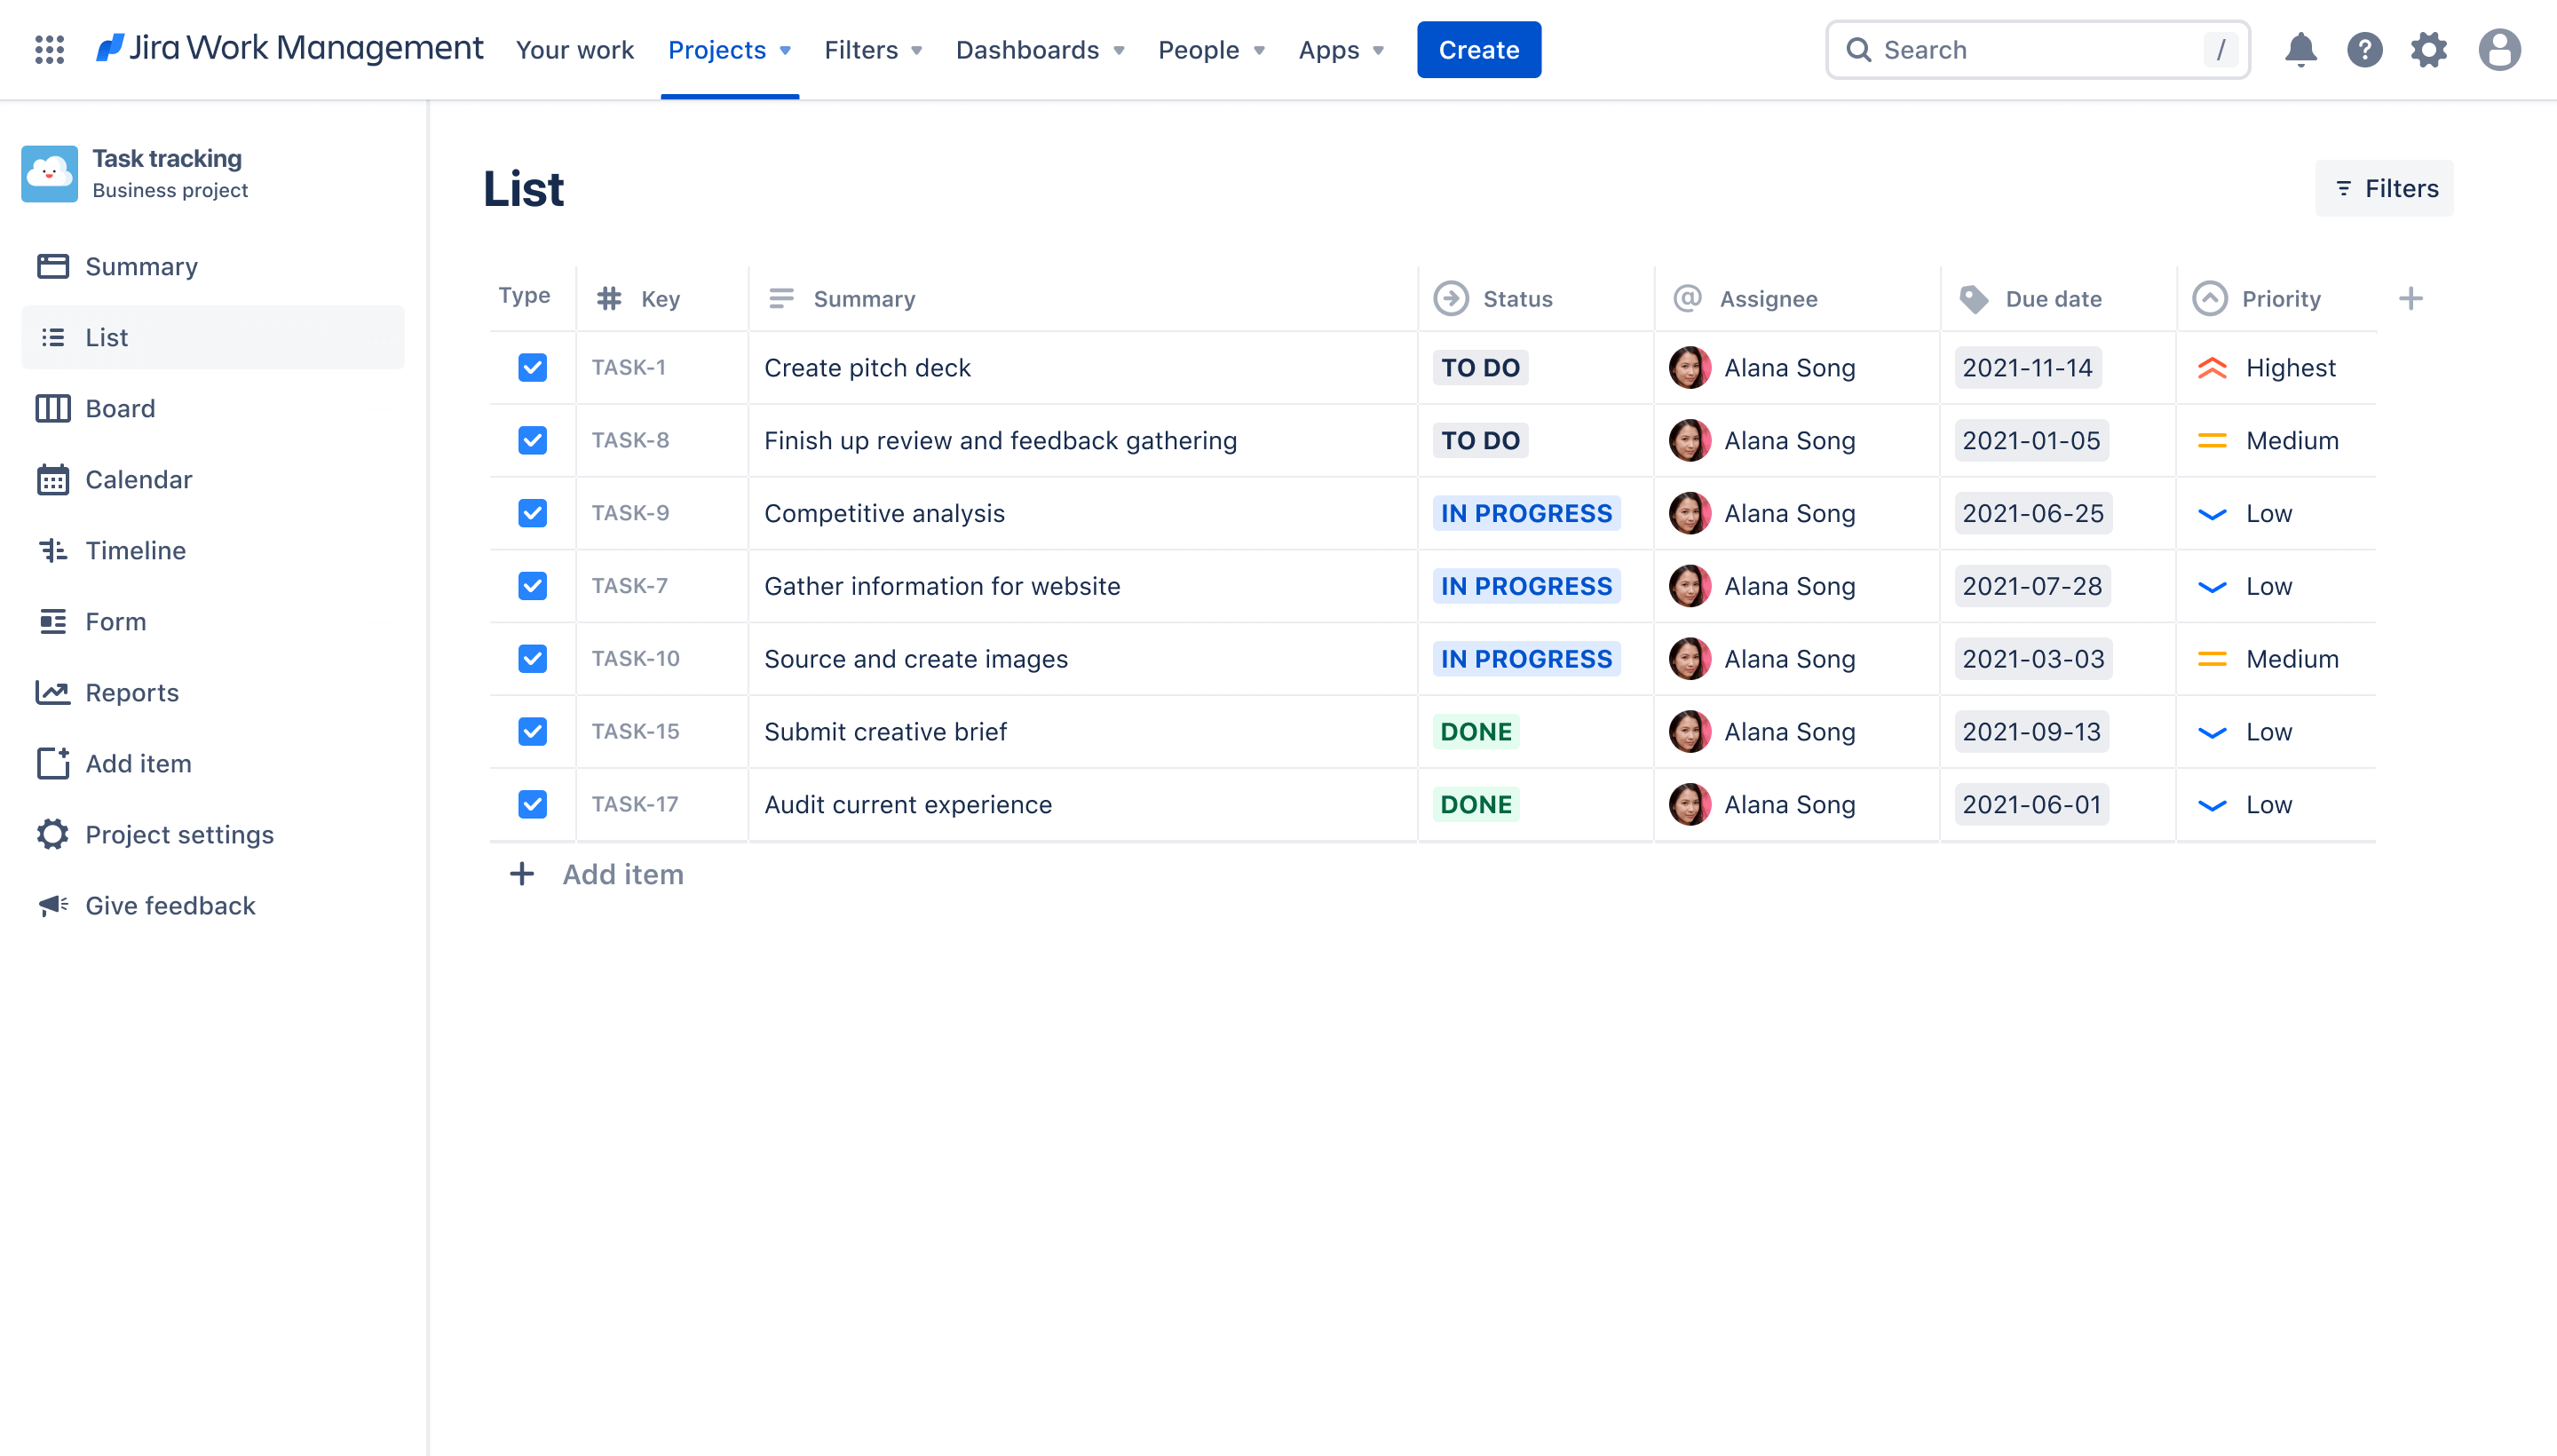 Task tracking list view in Jira Work Management